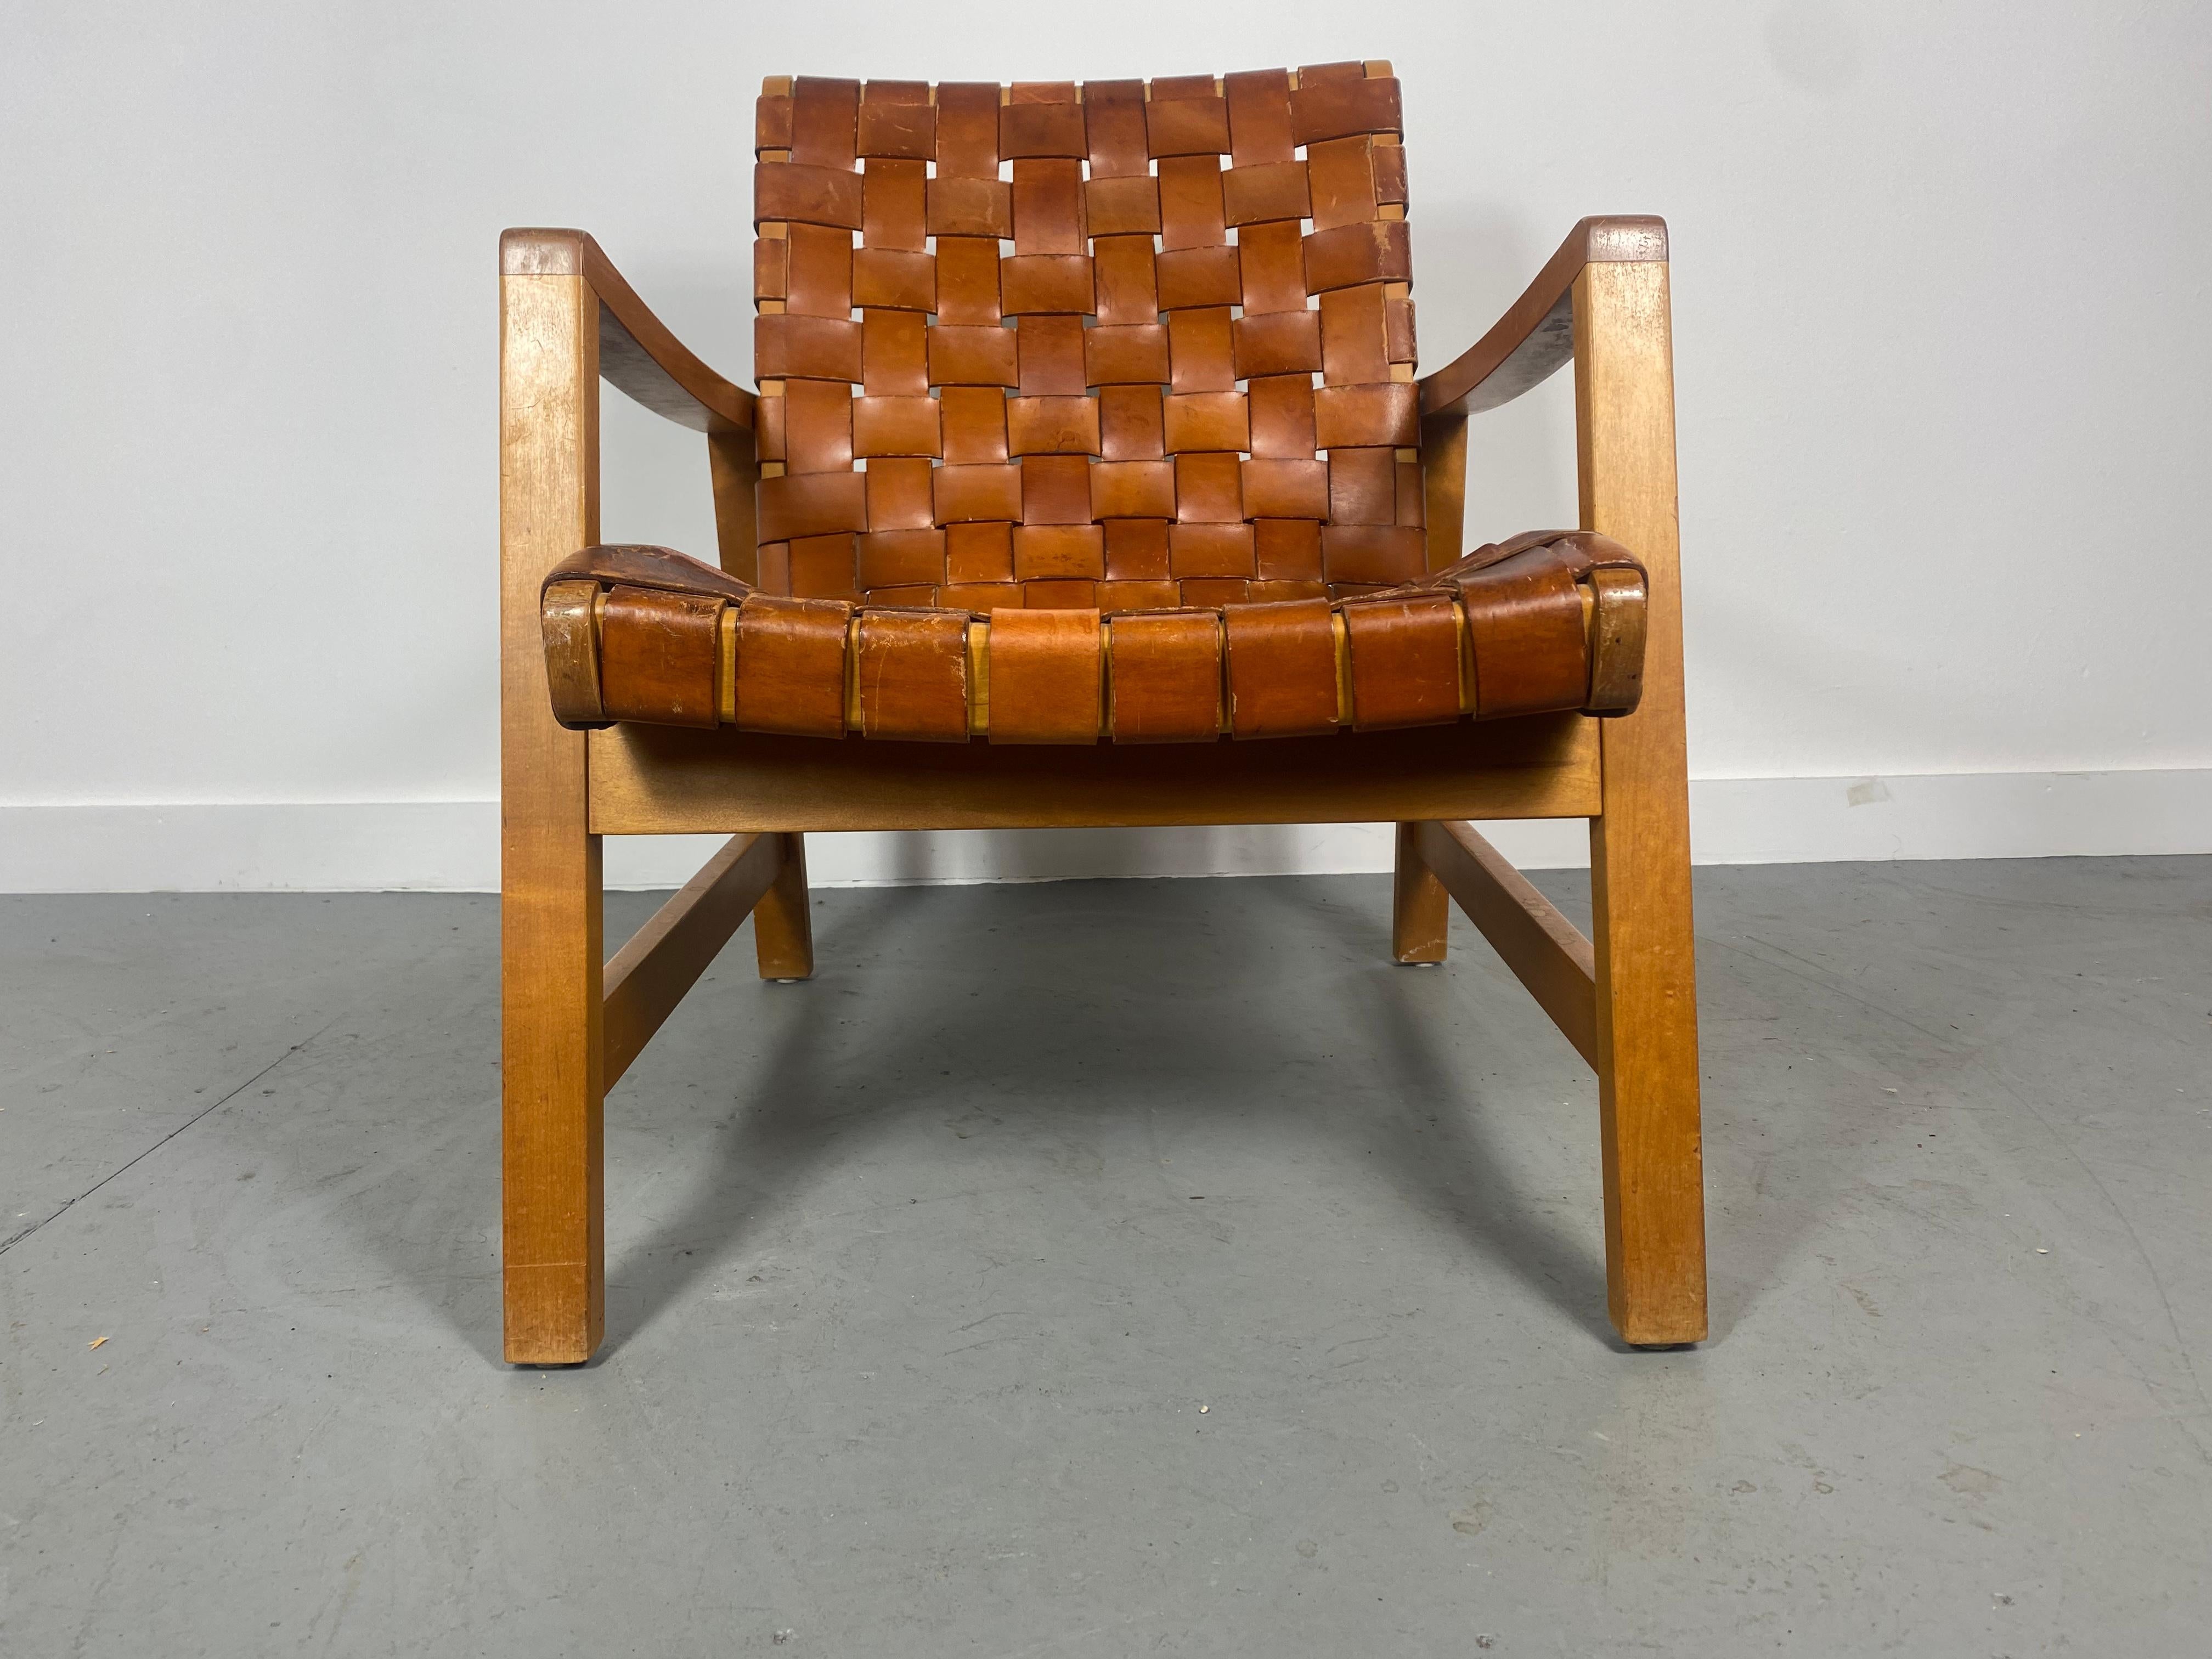 Mid-Century Modern strap leather webbed lounge chair by Jens Risom for Knoll. Early, Knoll bow-tie label. Wonderful Original, color and finish 
 perfect patina, Worn in all the right places. Chair has some replaced leather strapping. Extremely